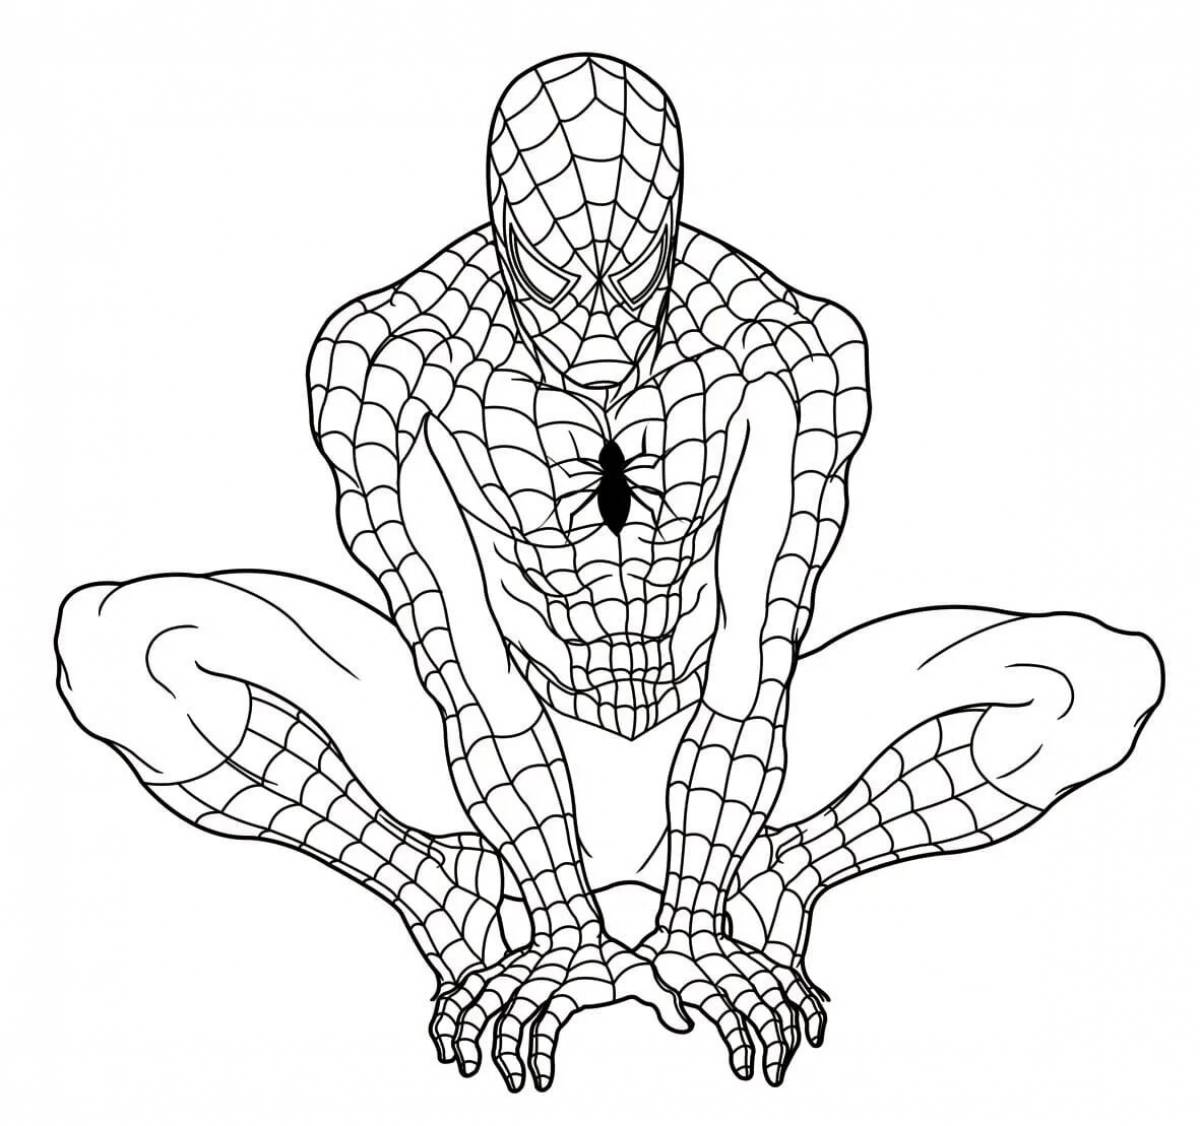 Living spider-man antistress coloring book